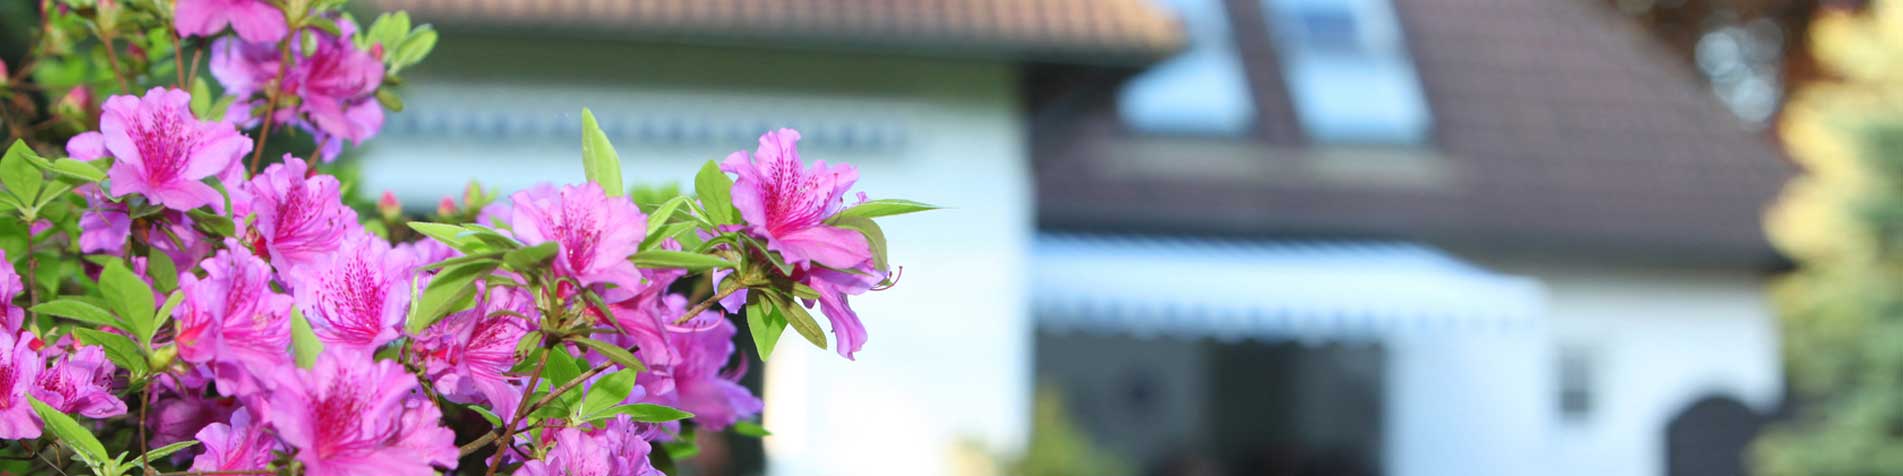 Flowers with house in background